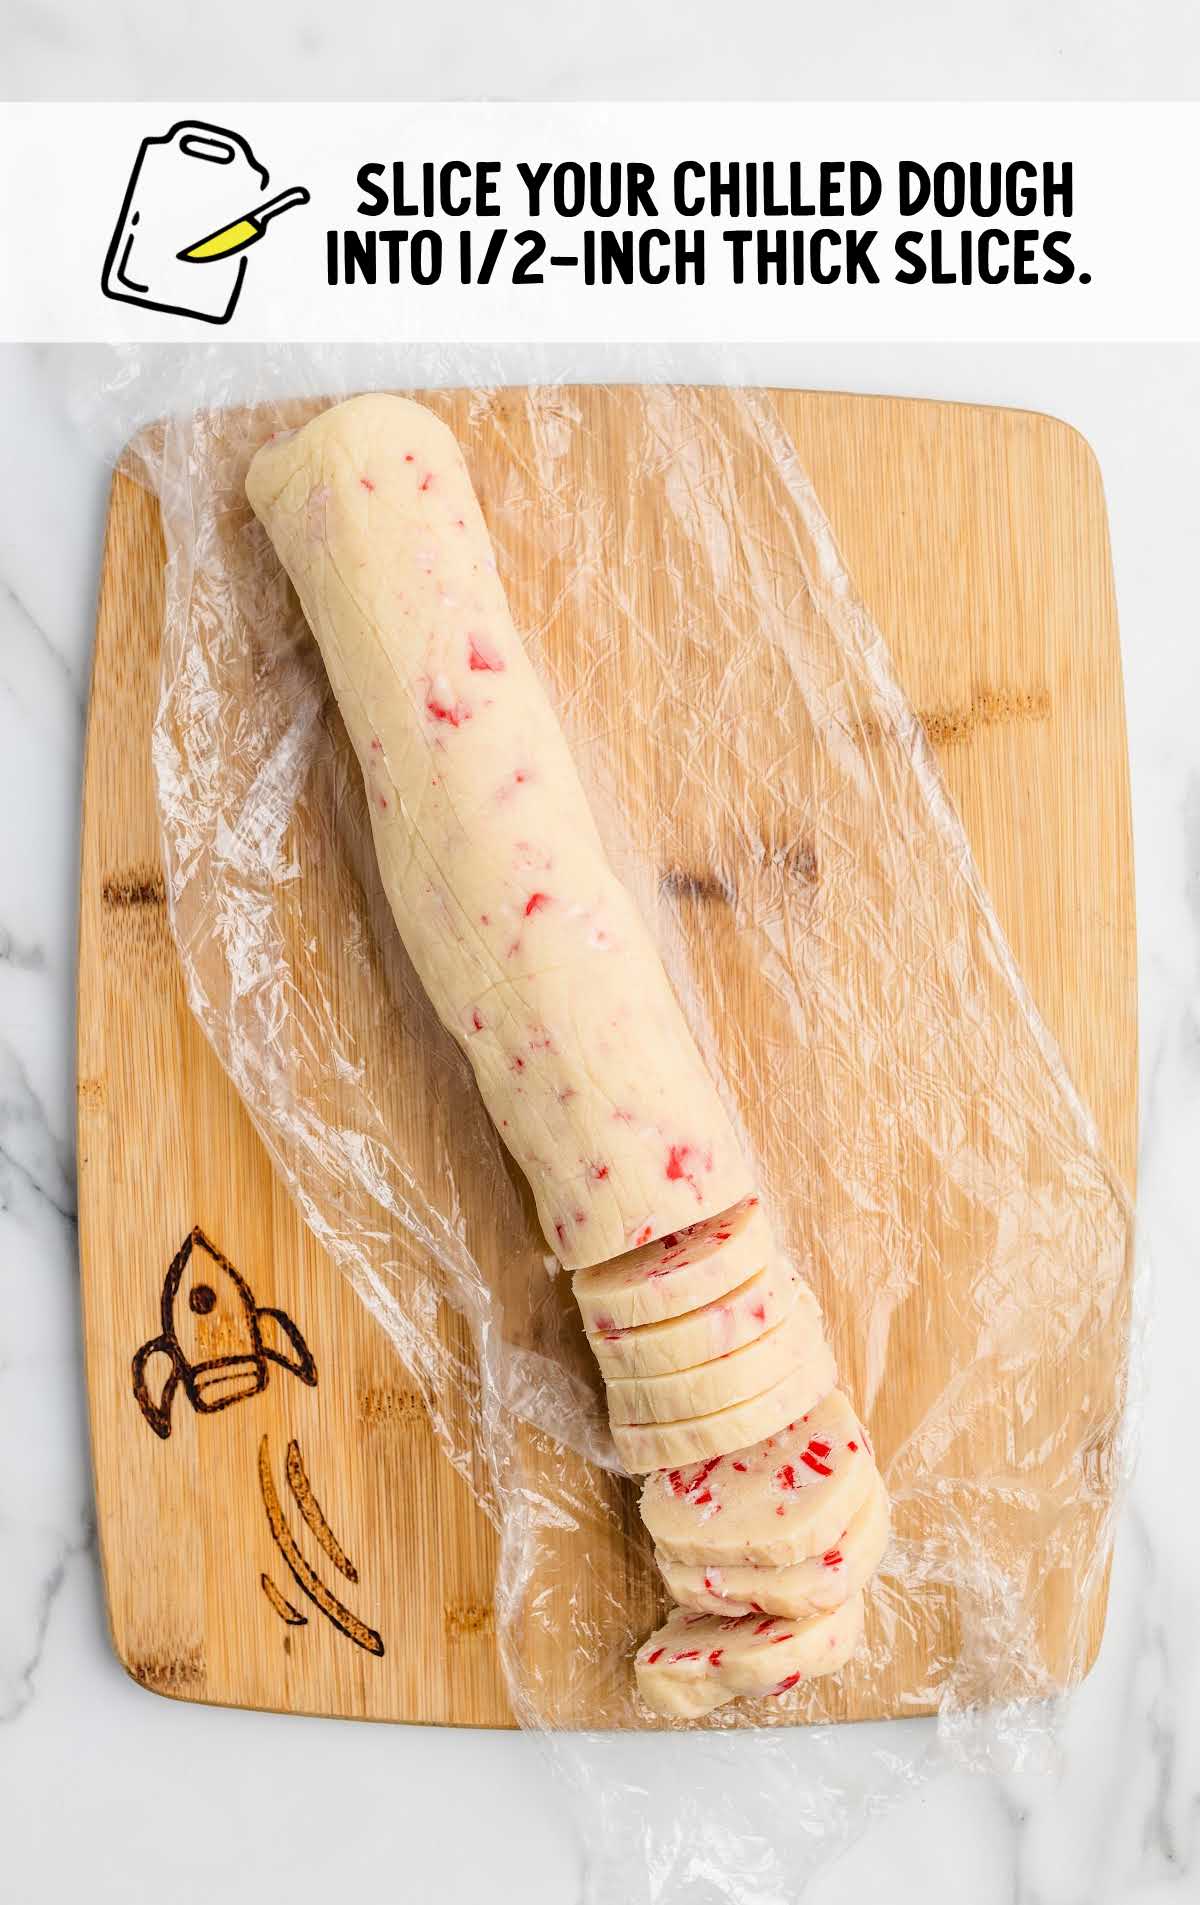 using a knife slice chilled dough